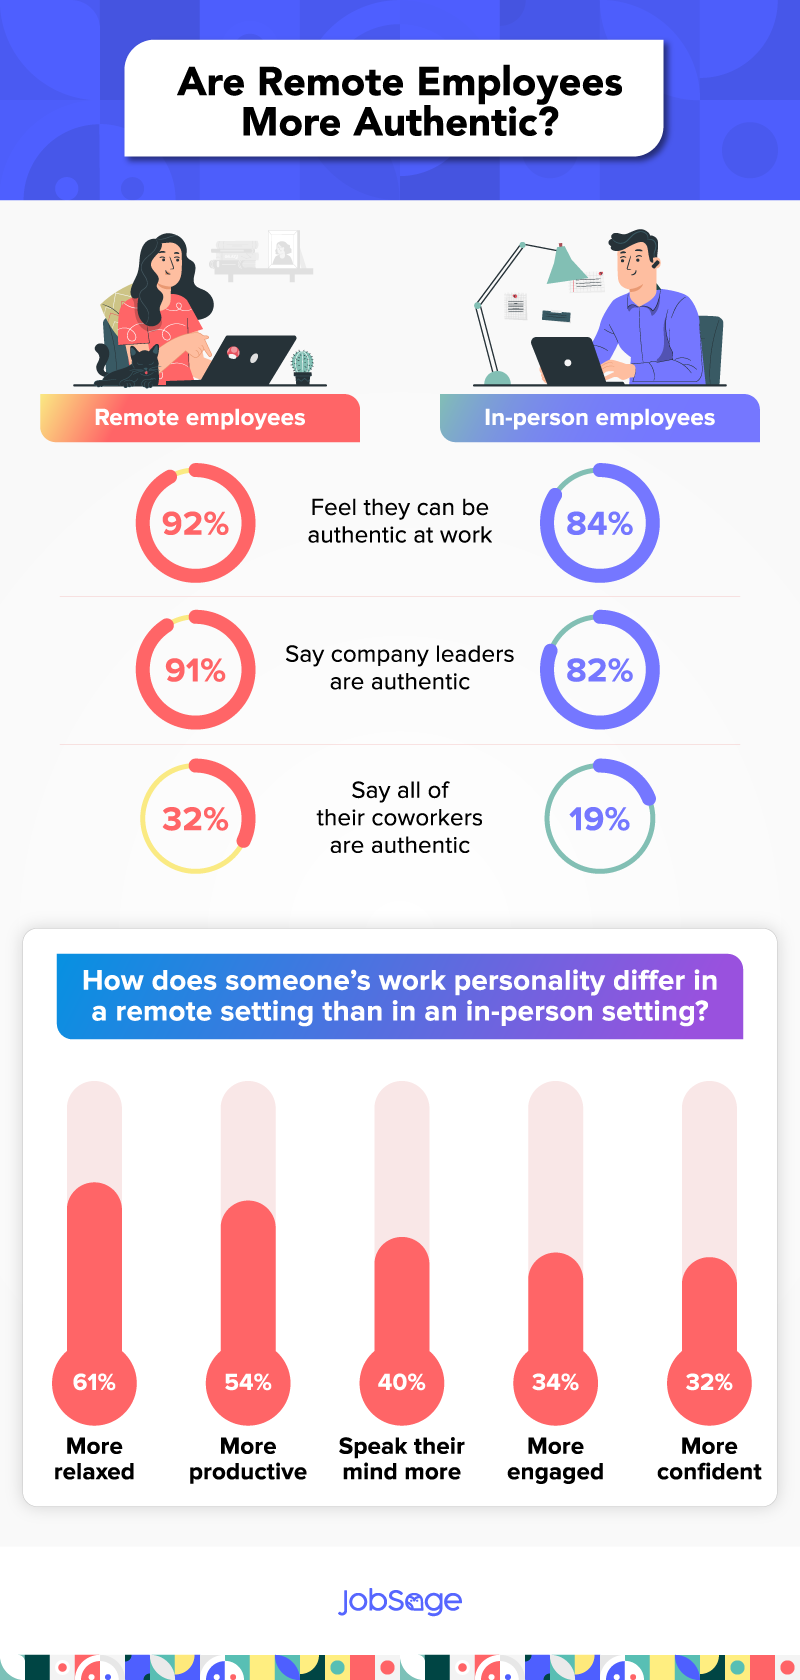 remote employees are more likely to be authentic at work